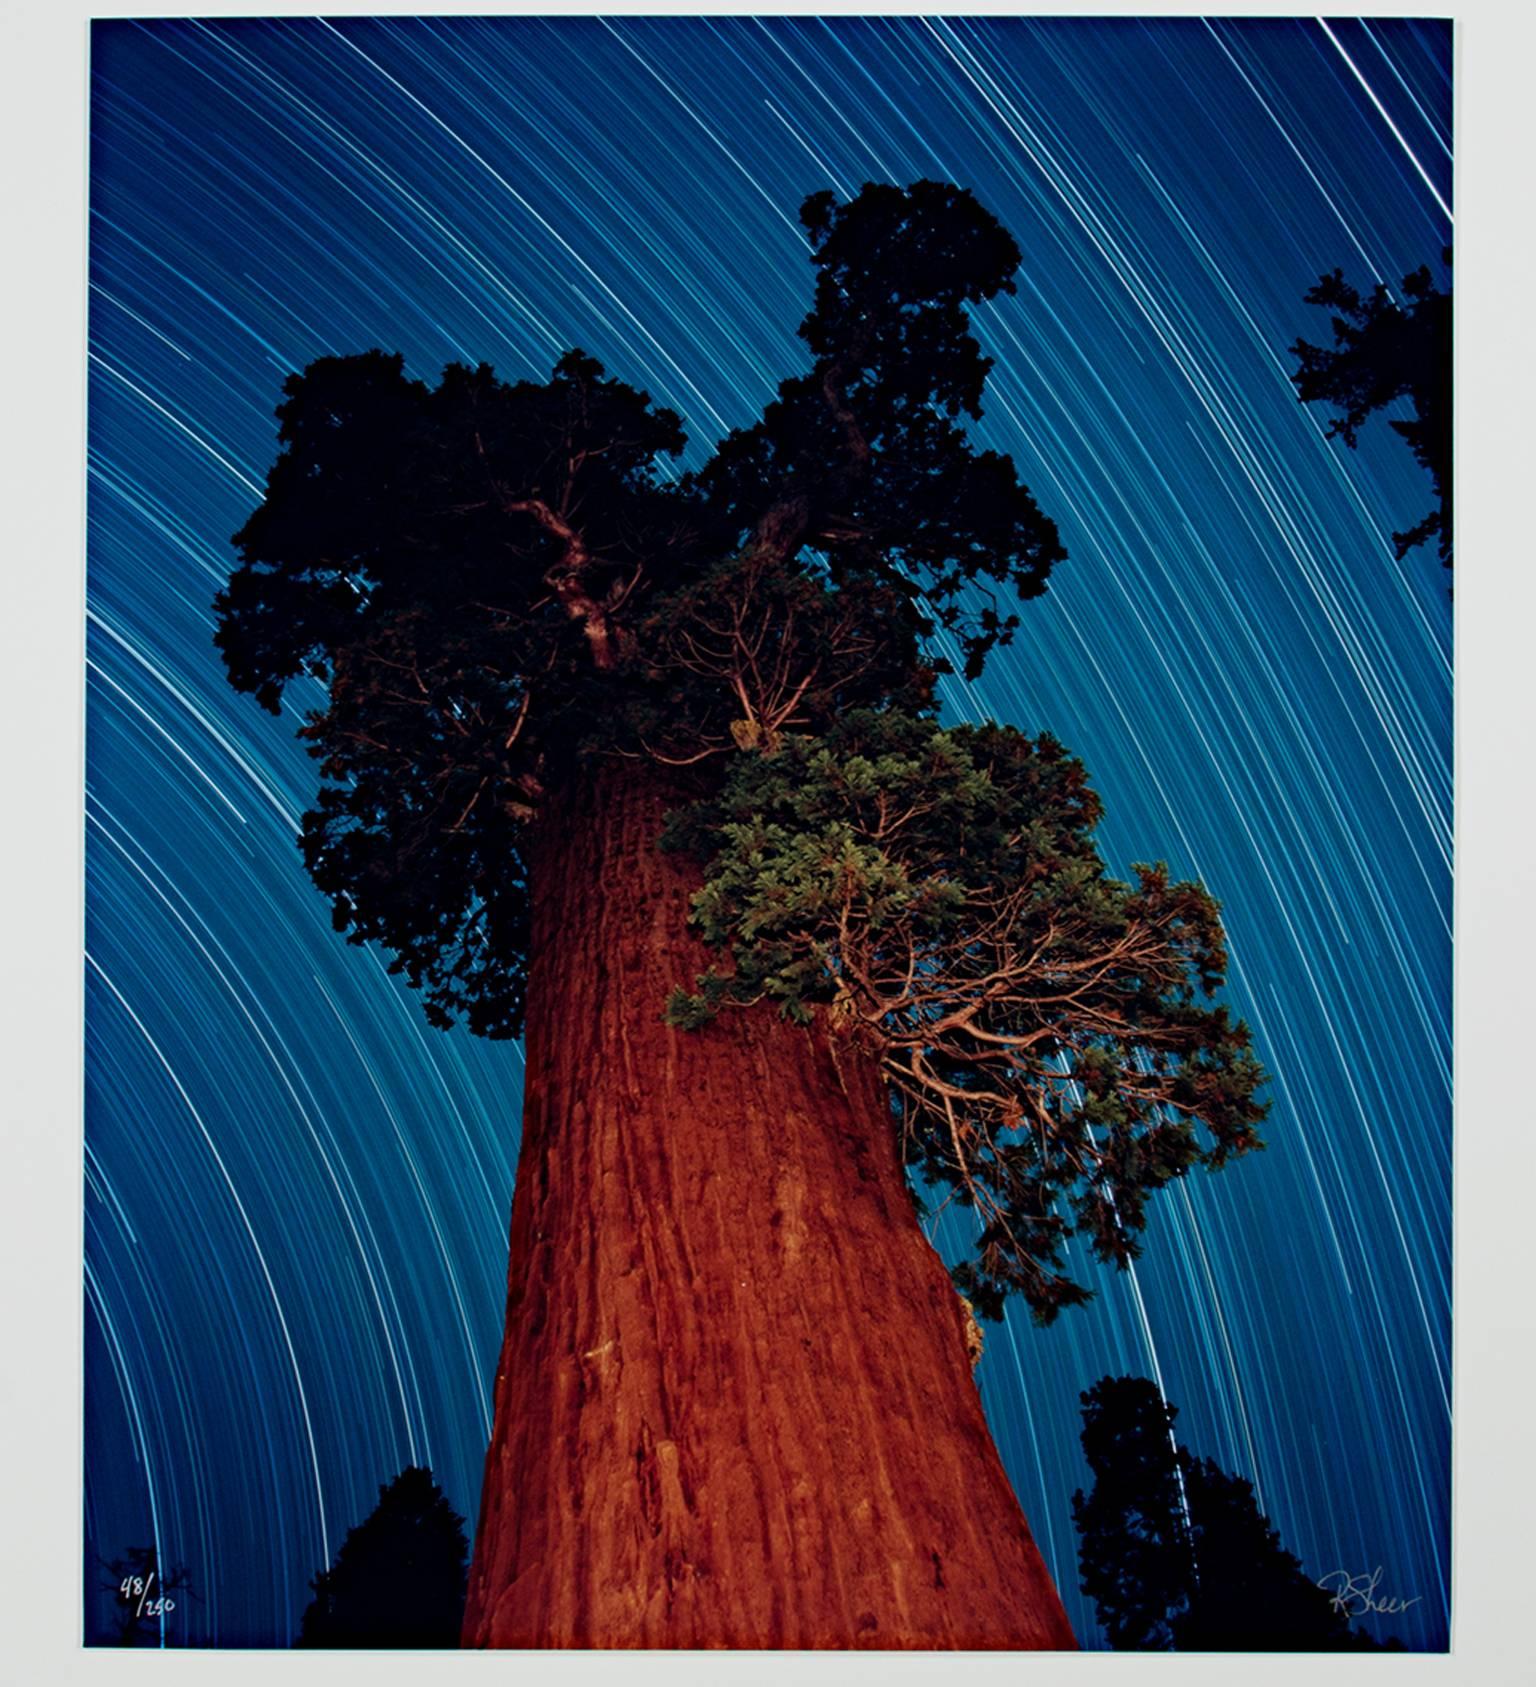 "Giant Sequoia Star Trail" is a limited edition long-exposure photograph signed by the artist Robert Kawika Sheer. This piece is signed by the artist in the lower right, and is editioned in the lower left. Edition 48/350. This piece shows an